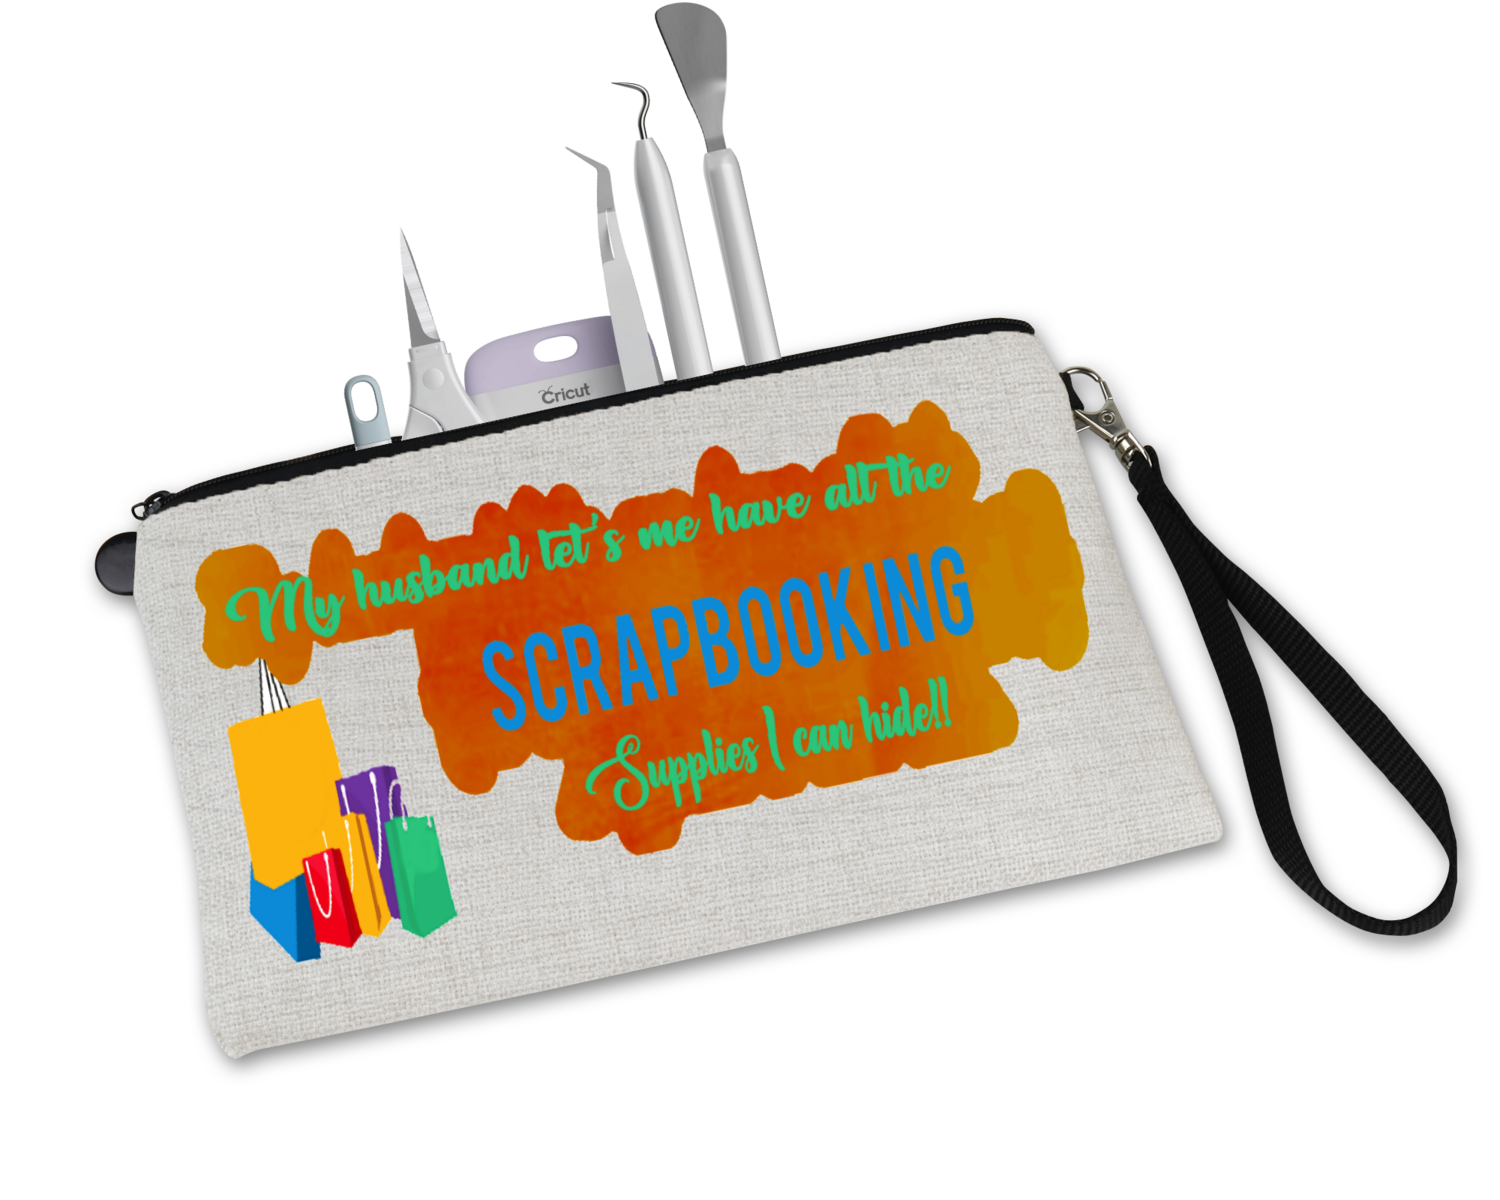 Crafting Tool Bag: MY HUSBAND LETS ME HAVE ALL THE SCRAPBOOKING SUPPLIES I CAN HIDE